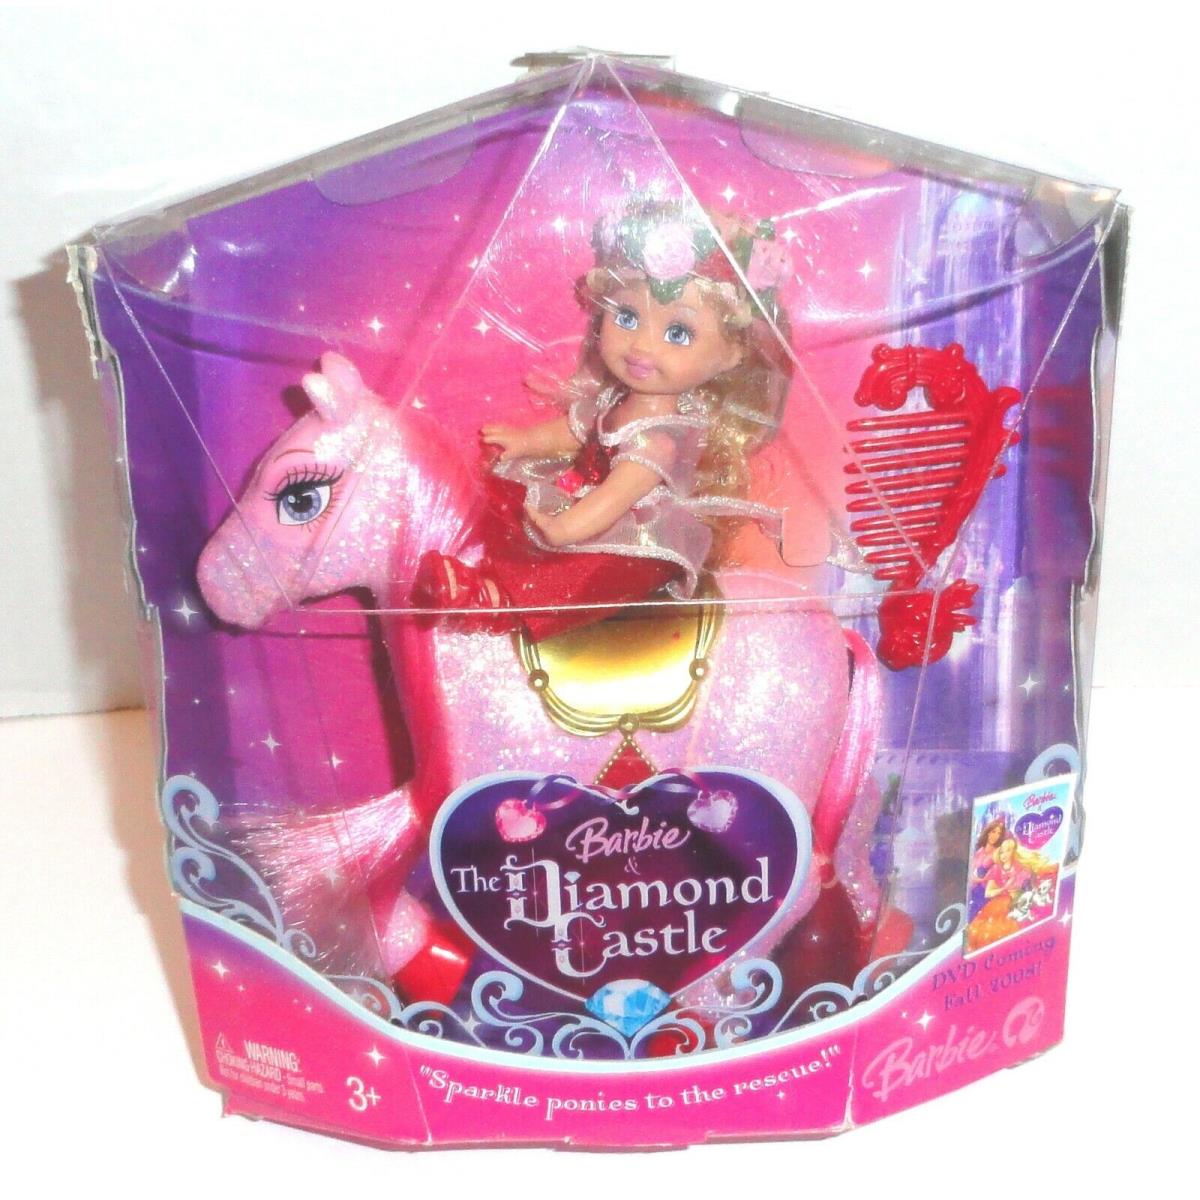 Barbie The Diamond Castle Kelly Doll as Melody with Pink Sparkle Pony 2008